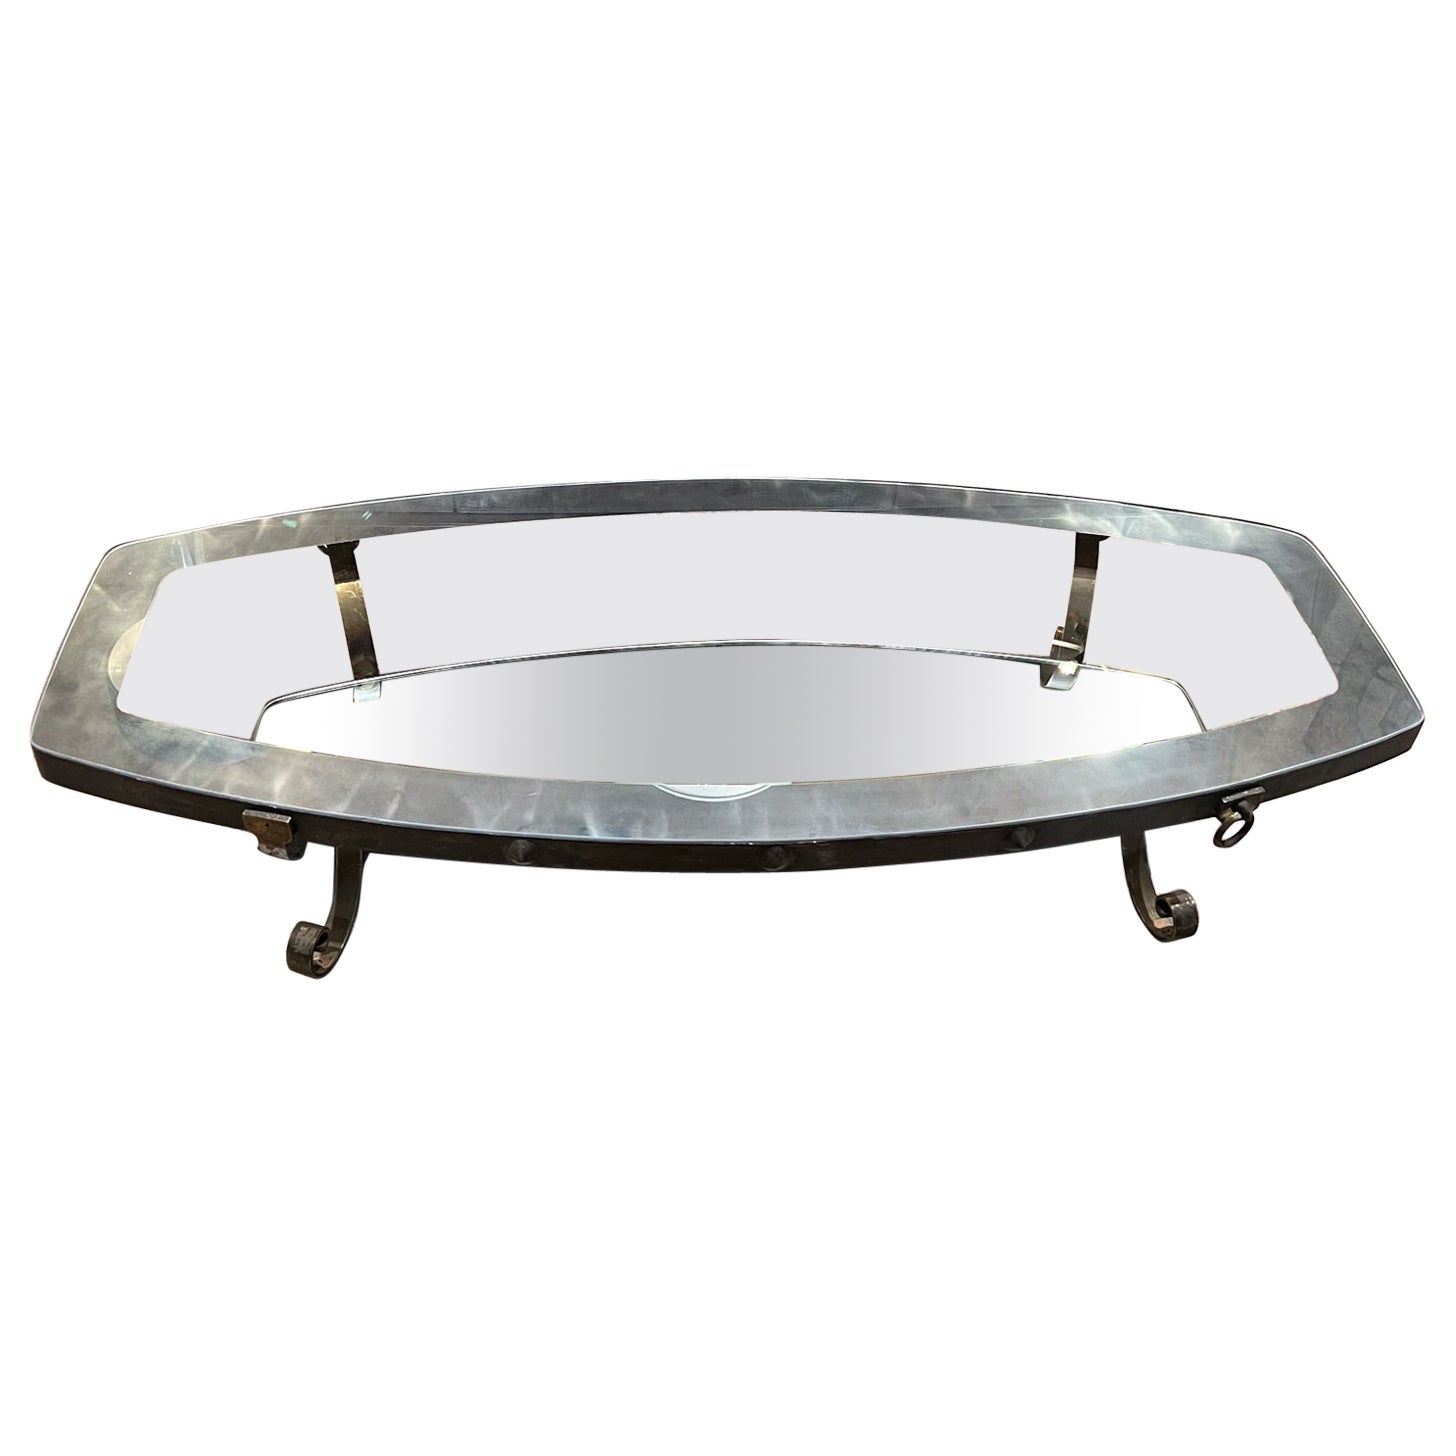 1950s Style Arturo Pani Long Oval Coffee Table Patinated Brass